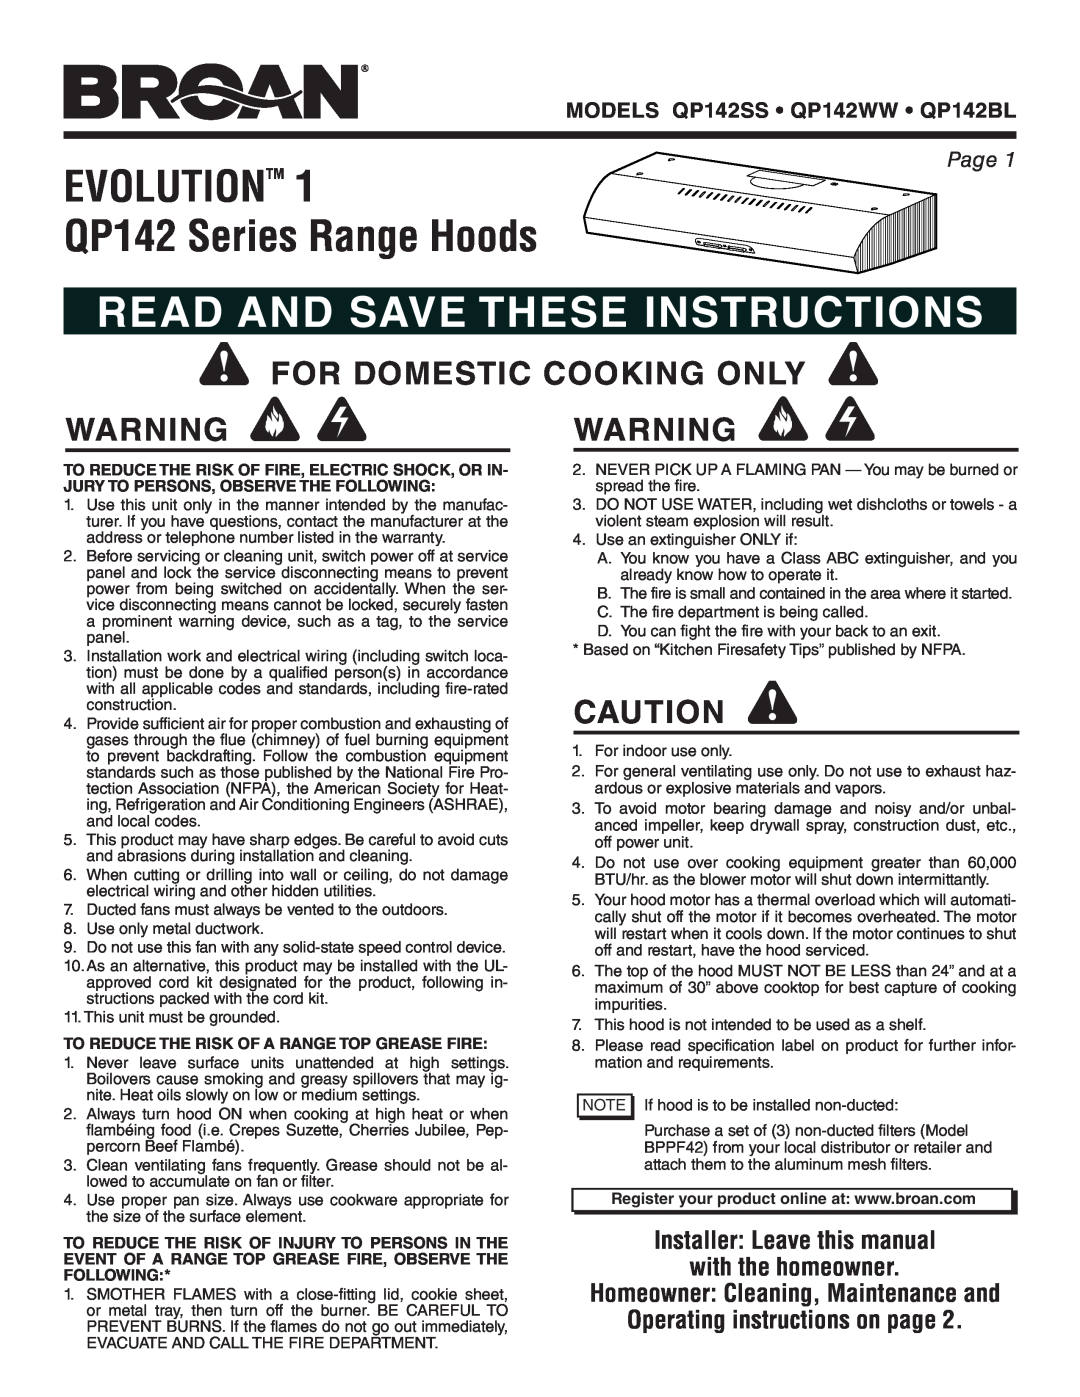 Broan QP142SS manual EVOLUTIONTM QP142 Series Range Hoods, Read And Save These Instructions, For Domestic Cooking Only 